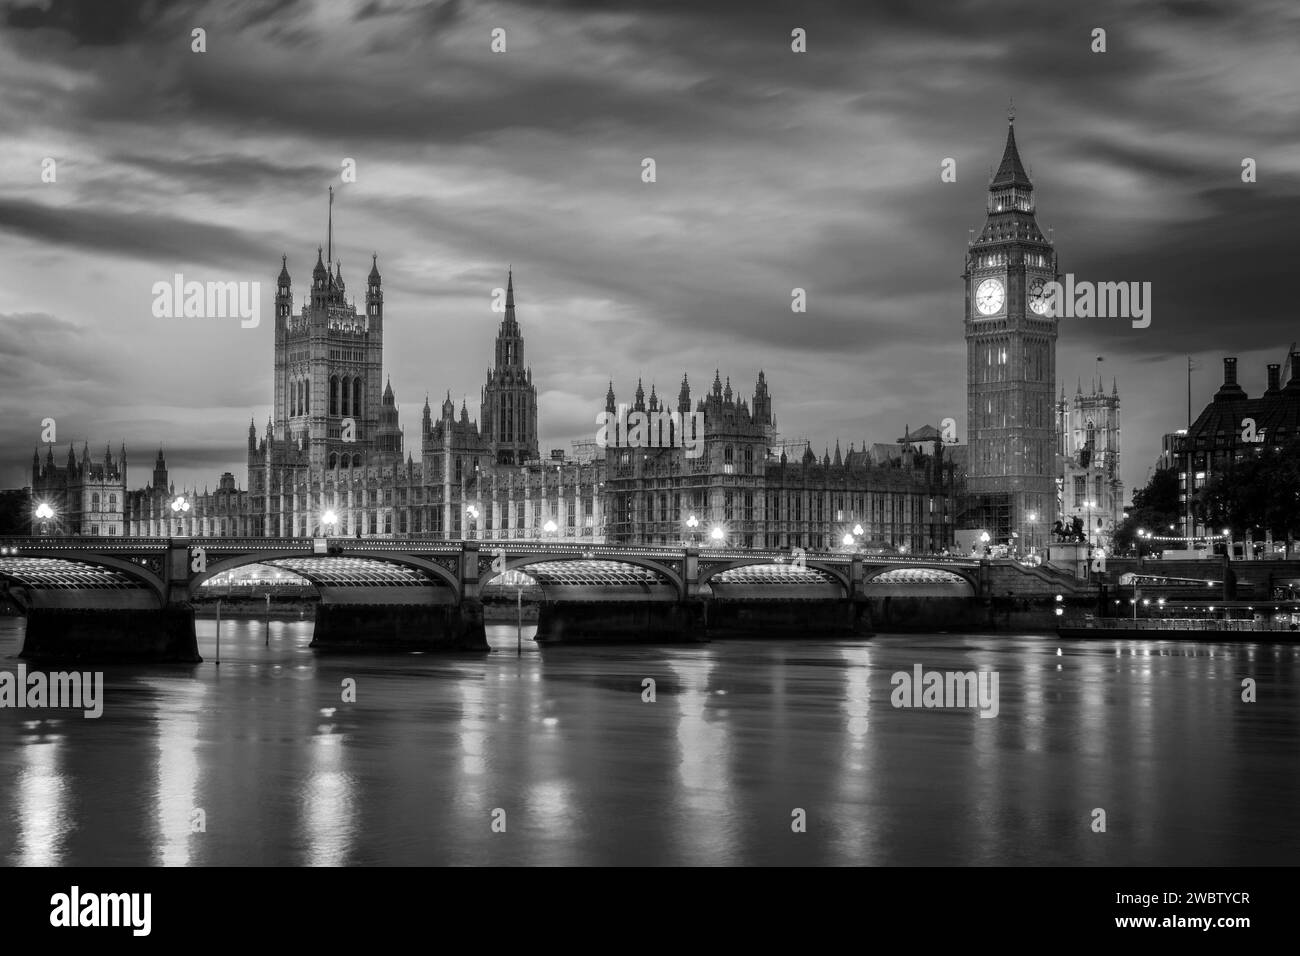 View of Westminster palace and bridge over river Thames with Big Ben illuminated at night in London, UK Stock Photo